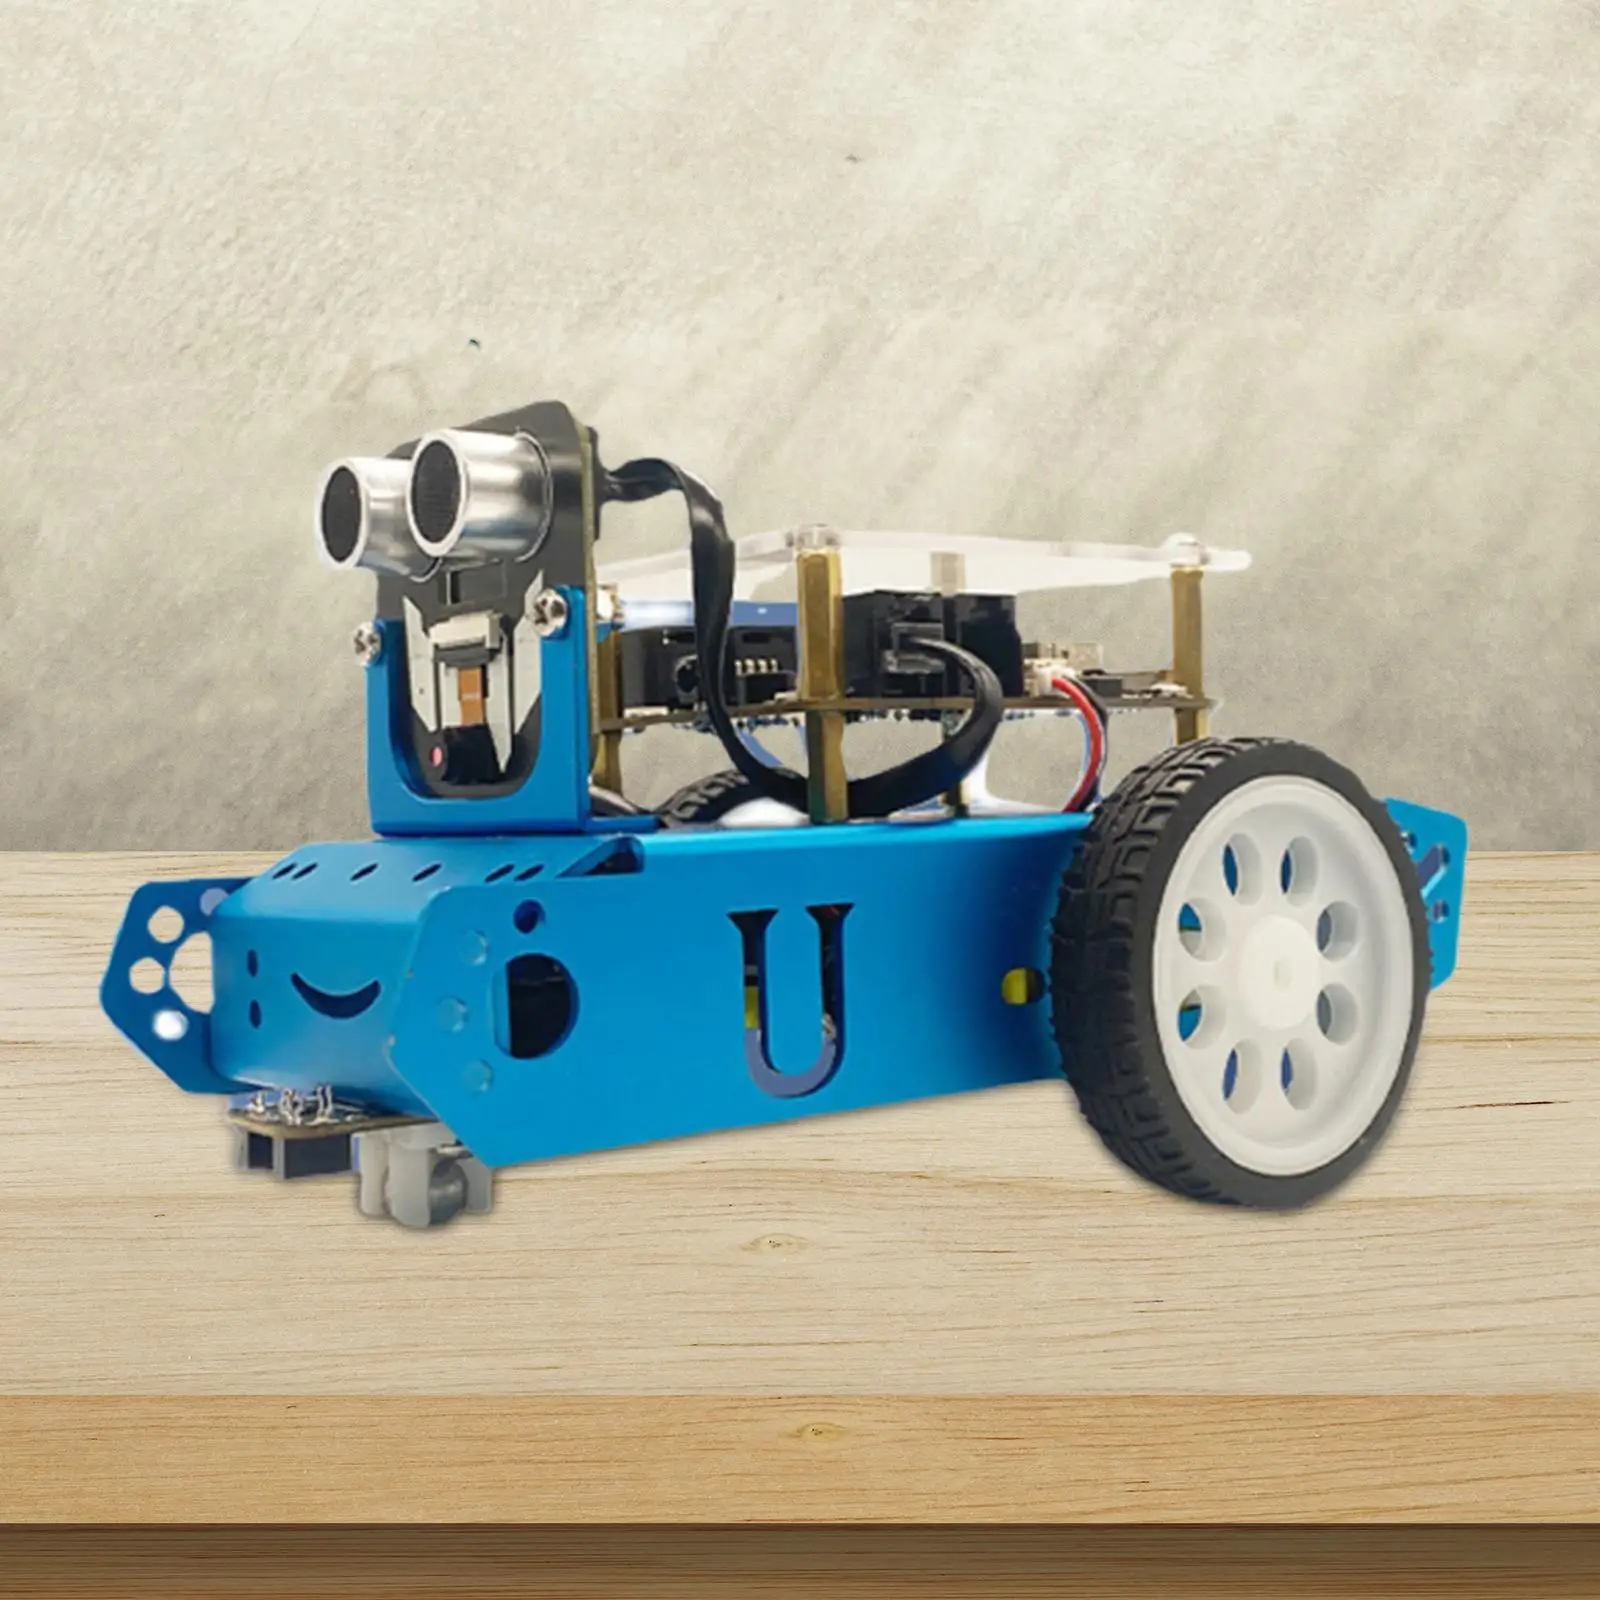 Programming Thrust Robot DIY for Hands on Electronic Learning Concentration